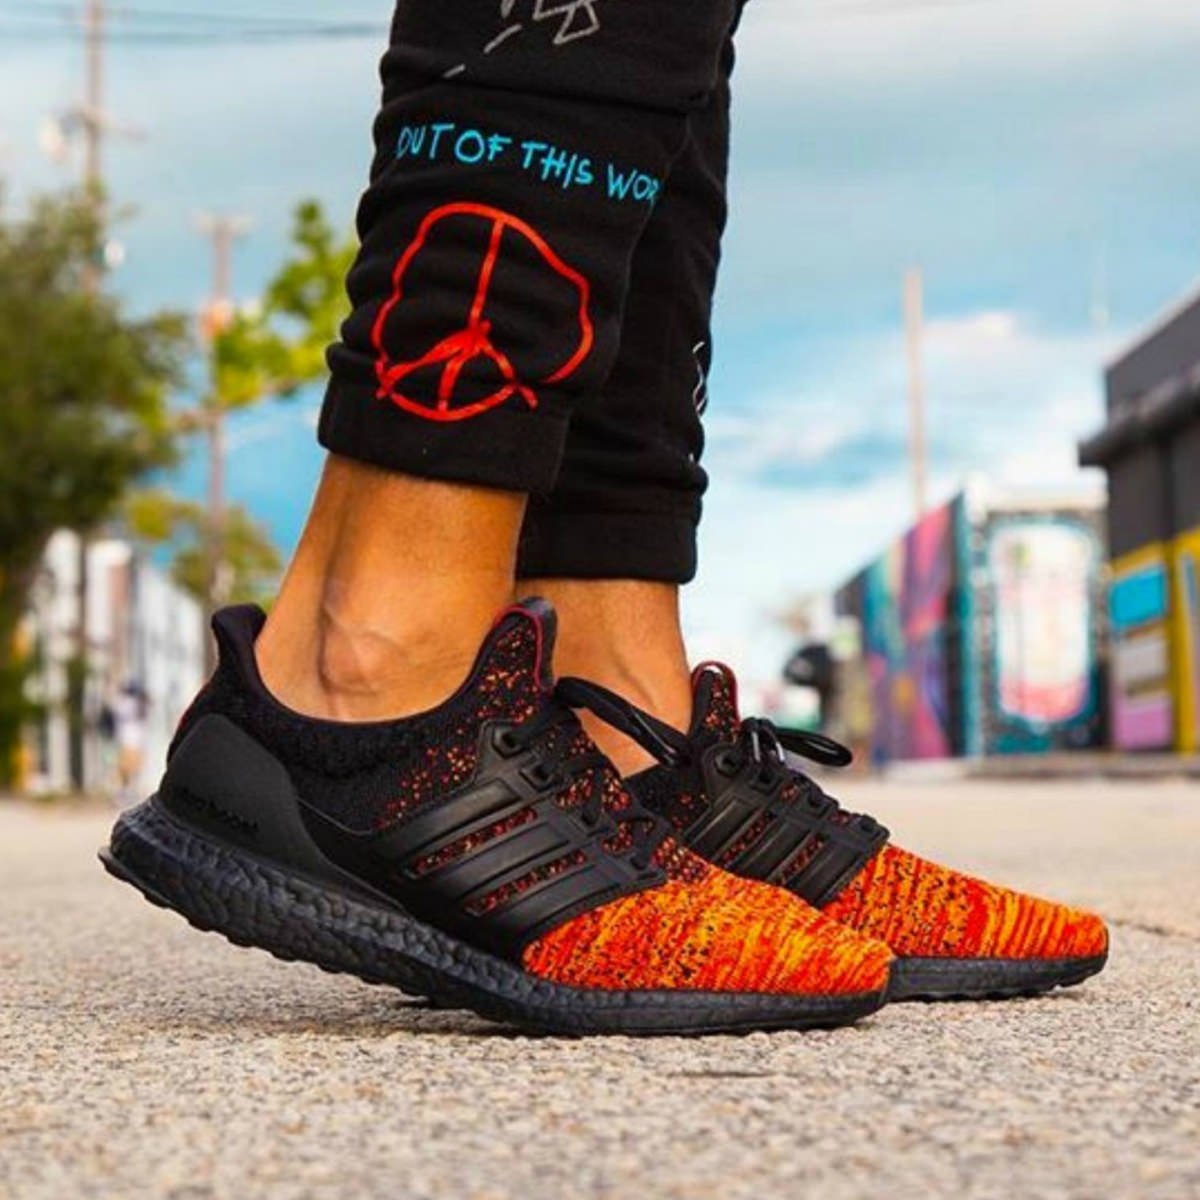 adidas Game Of Thrones UltraBoost 4.0 